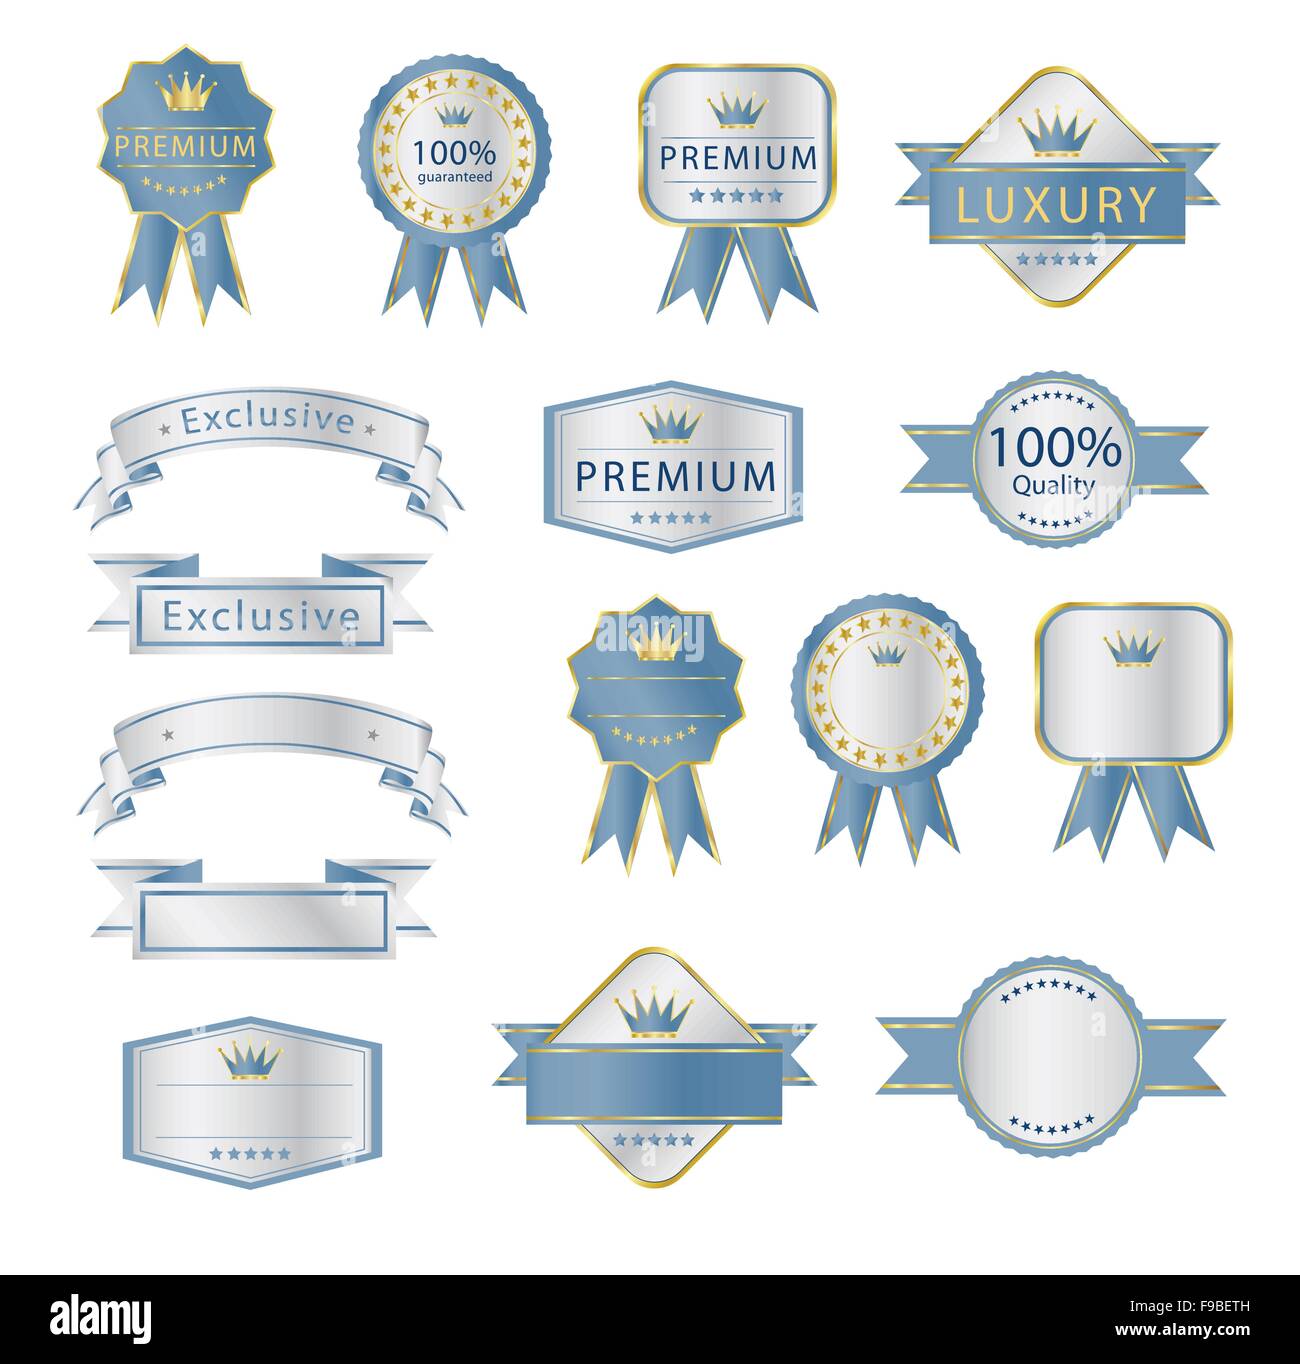 Blank Premium label and budges luxury soft blue and silver Stock Vector